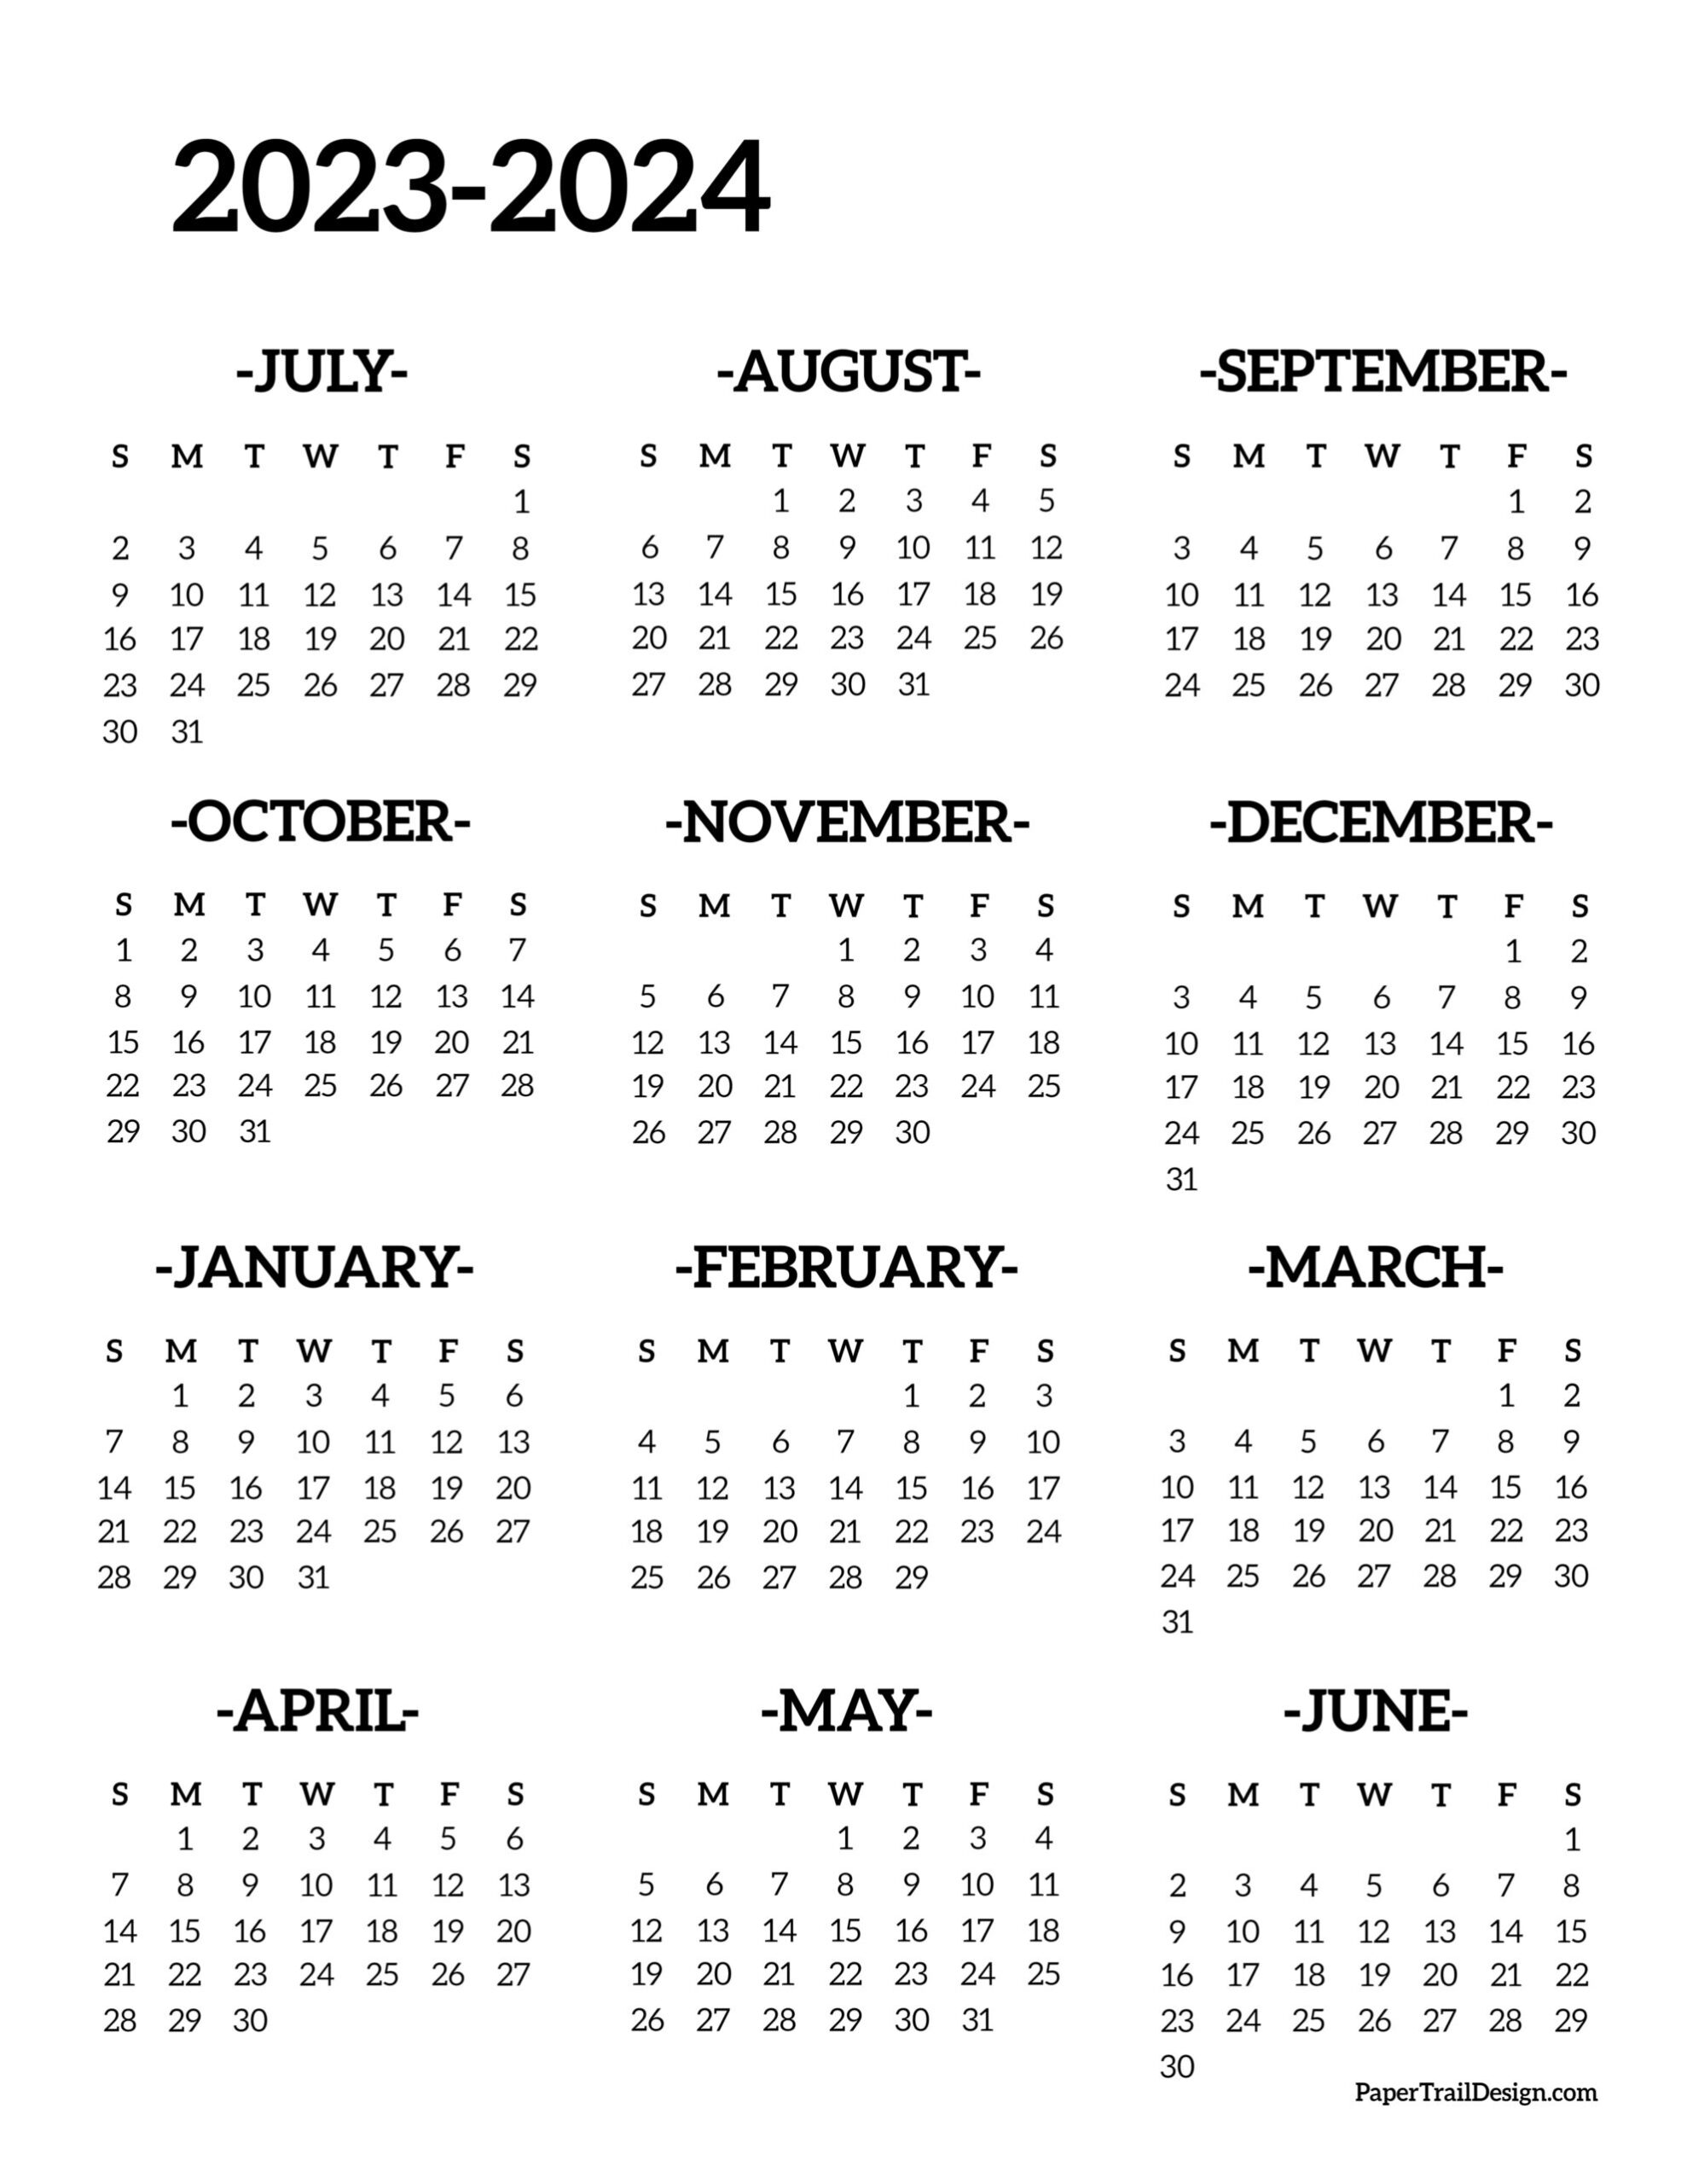 2023-2024 School Year Calendar Free Printable - Paper Trail Design | Yearly Calendar 2023 And 2024